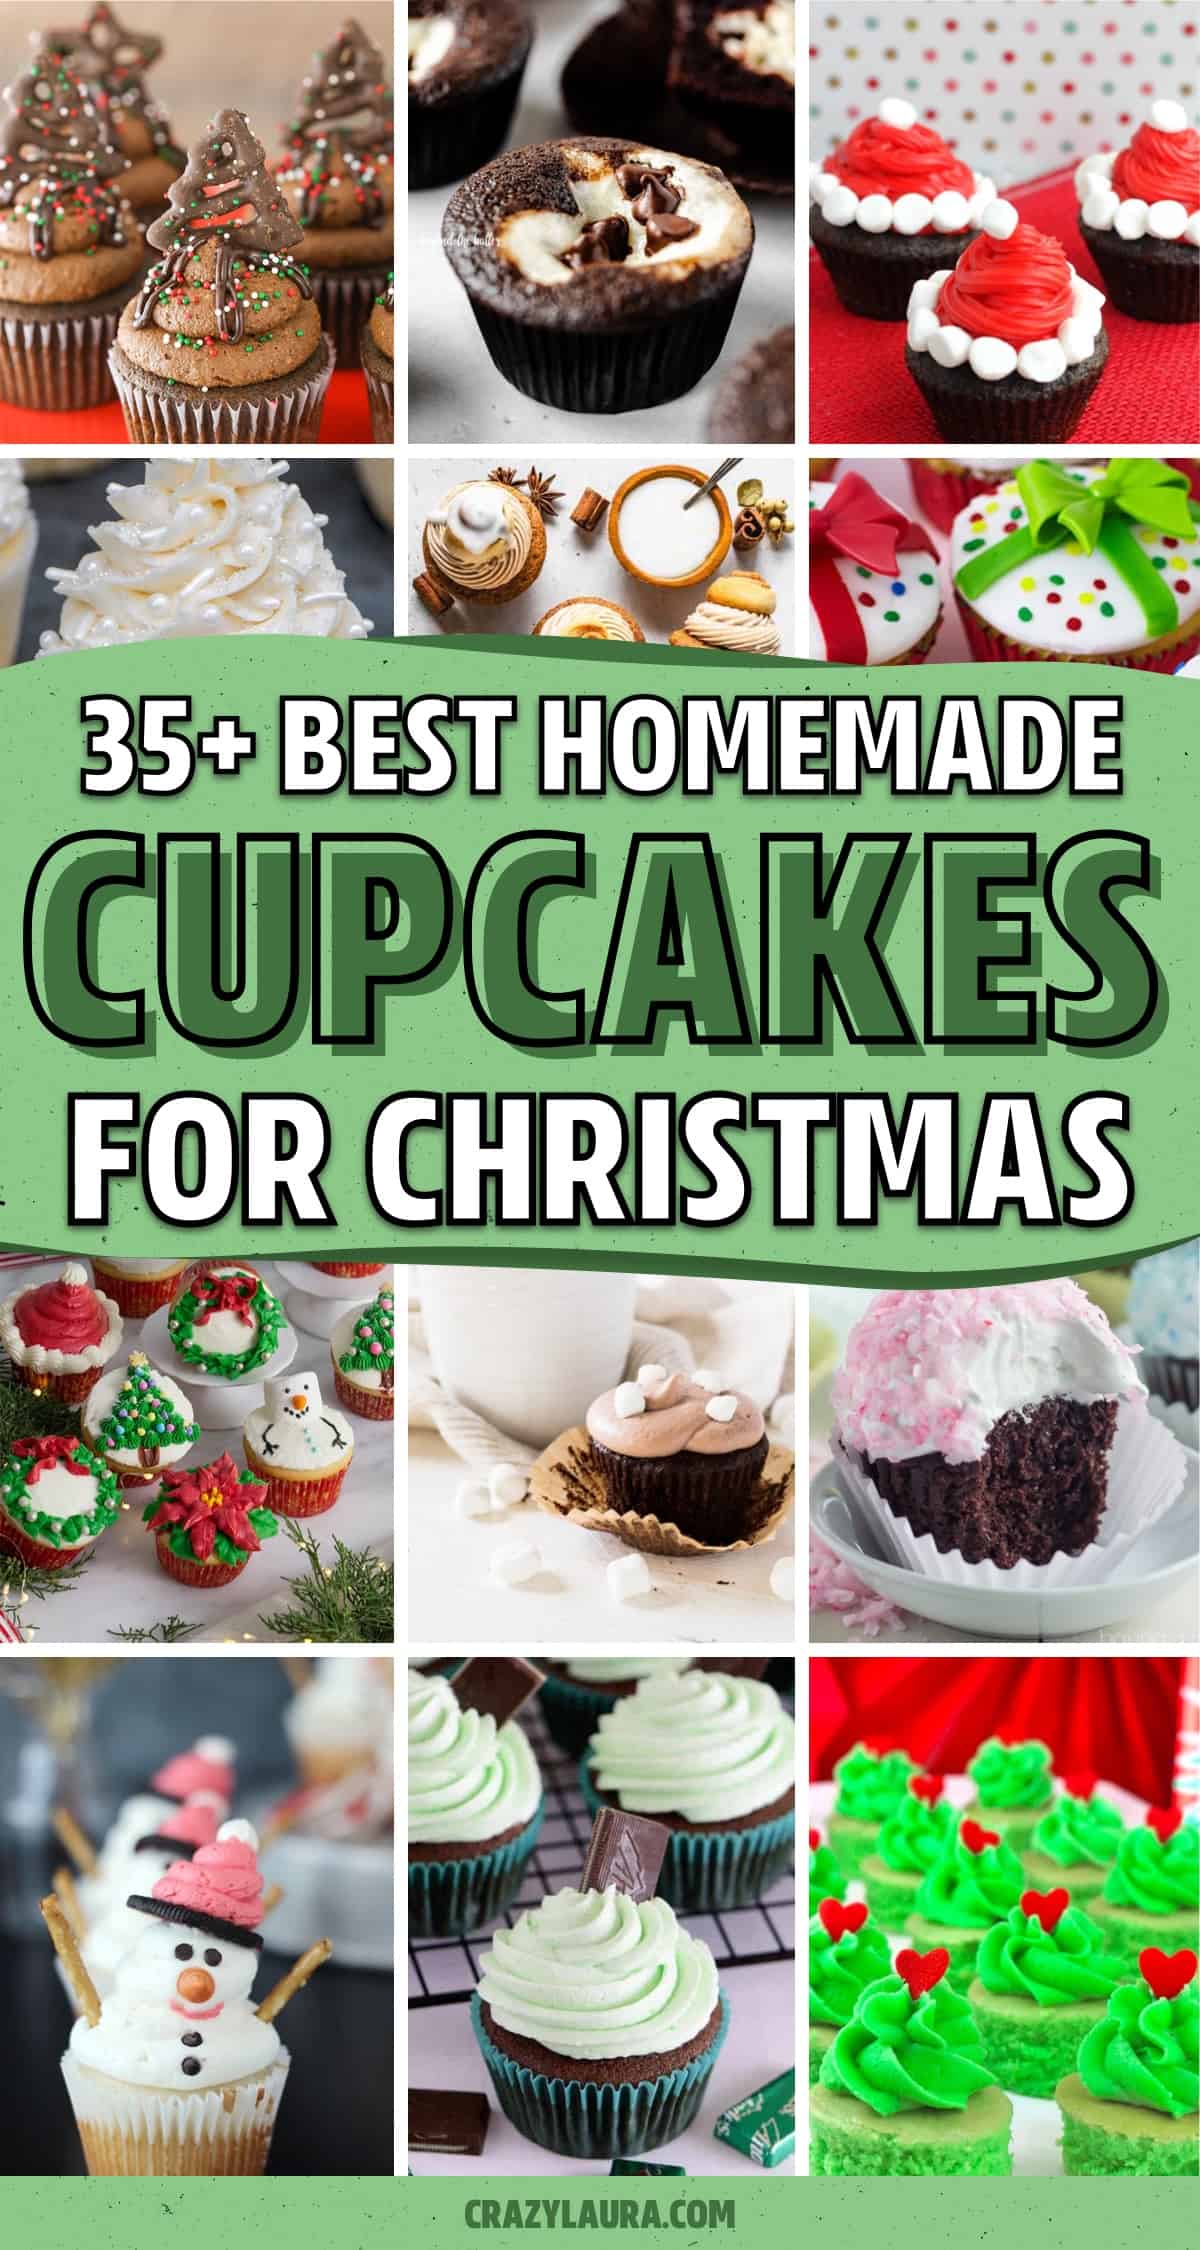 cupcake examples for christmas time